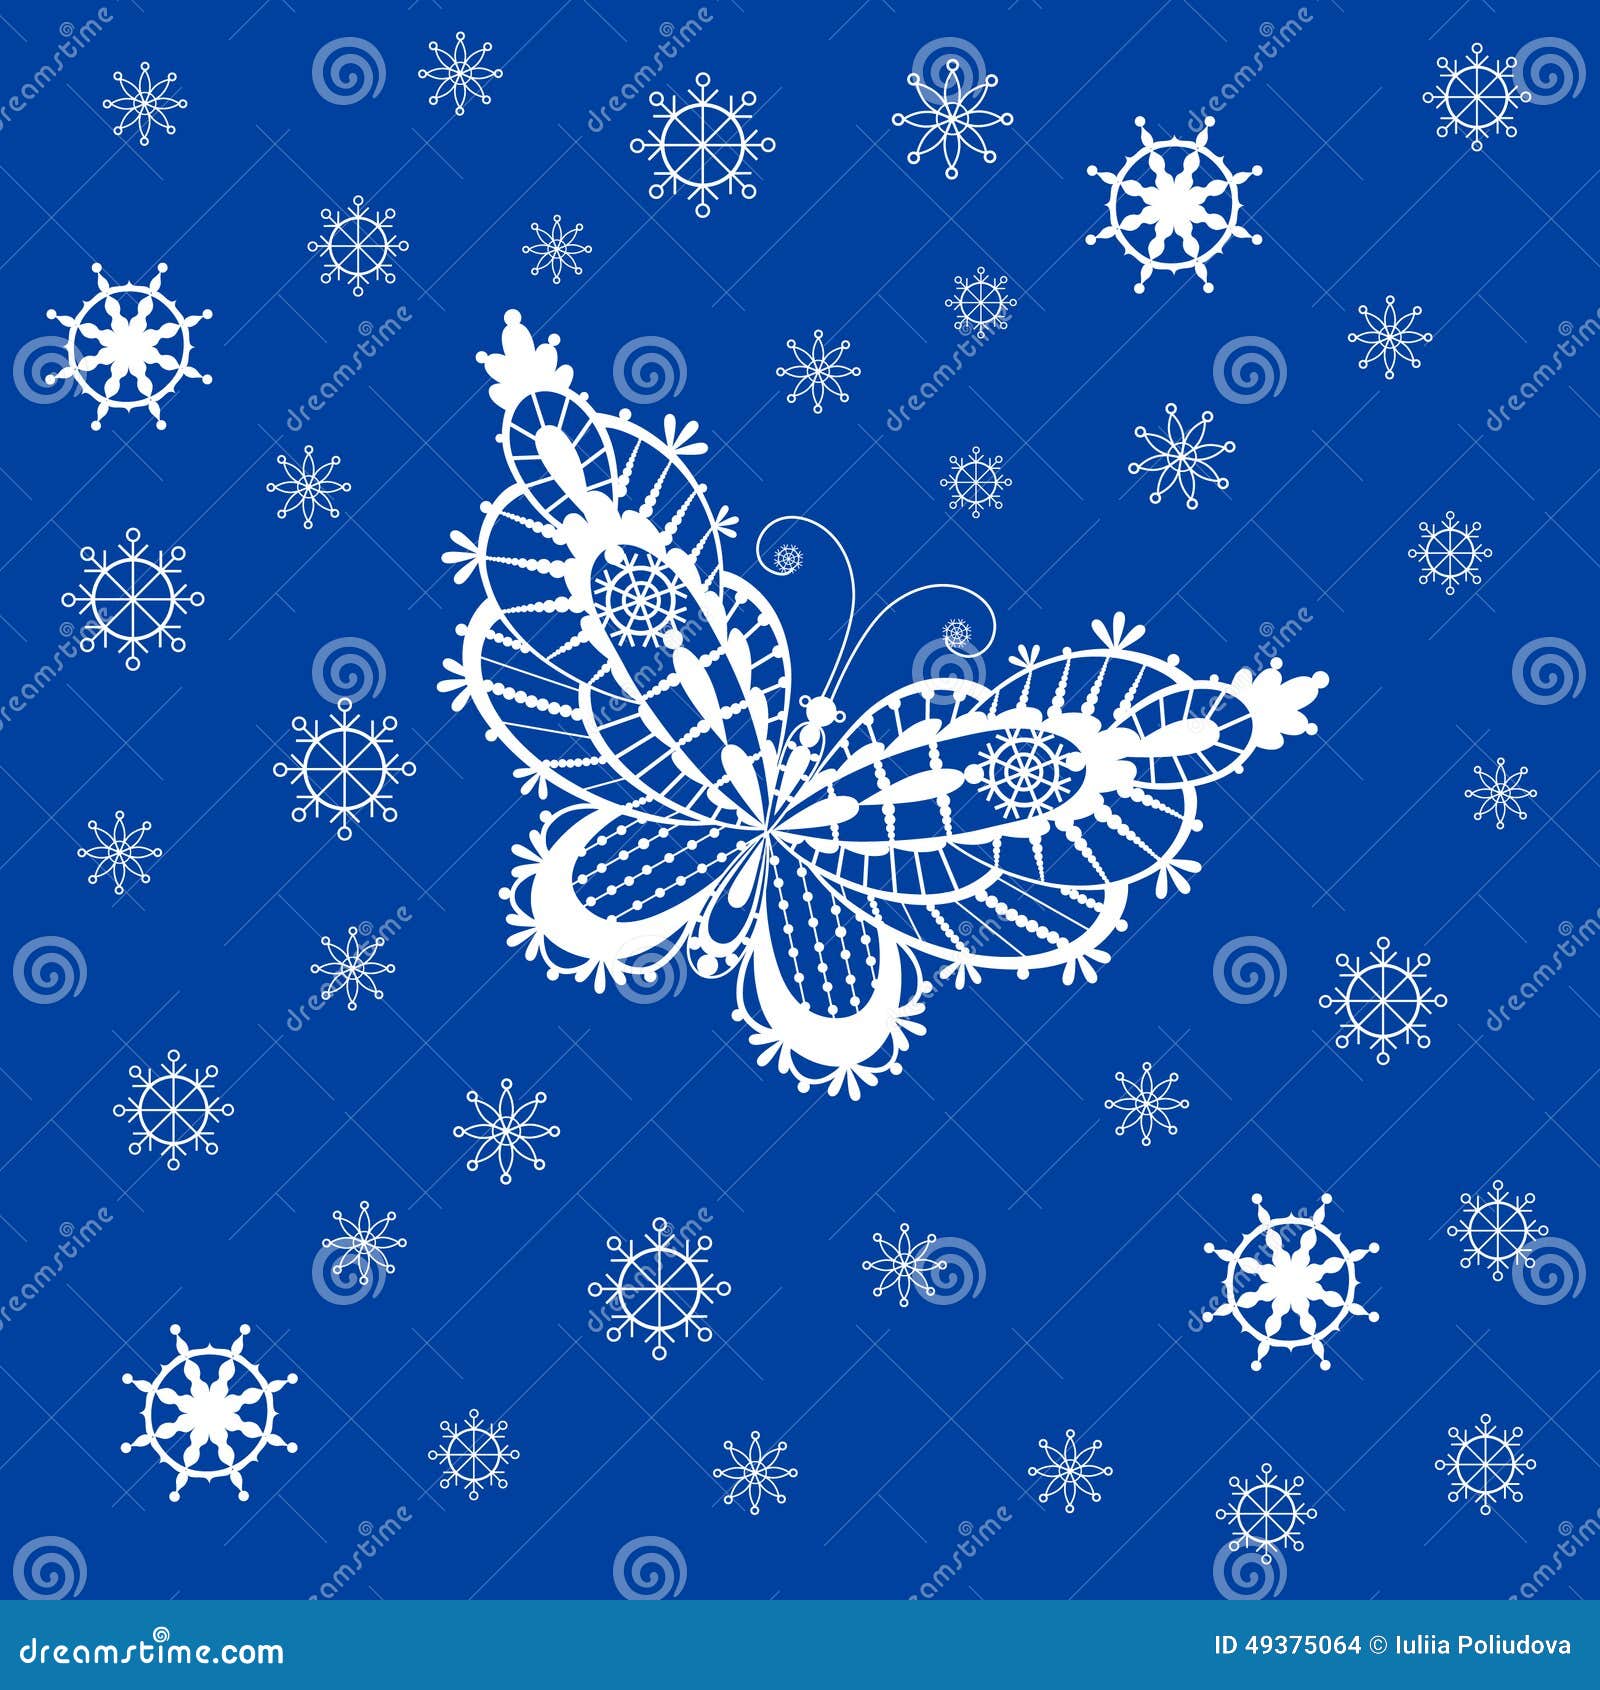 ornamented-abstract-lace-snowflake-butterfly-simple-snowflak-silhouette-invented-decorative-snowflakes-designed-to-49375064.jpg